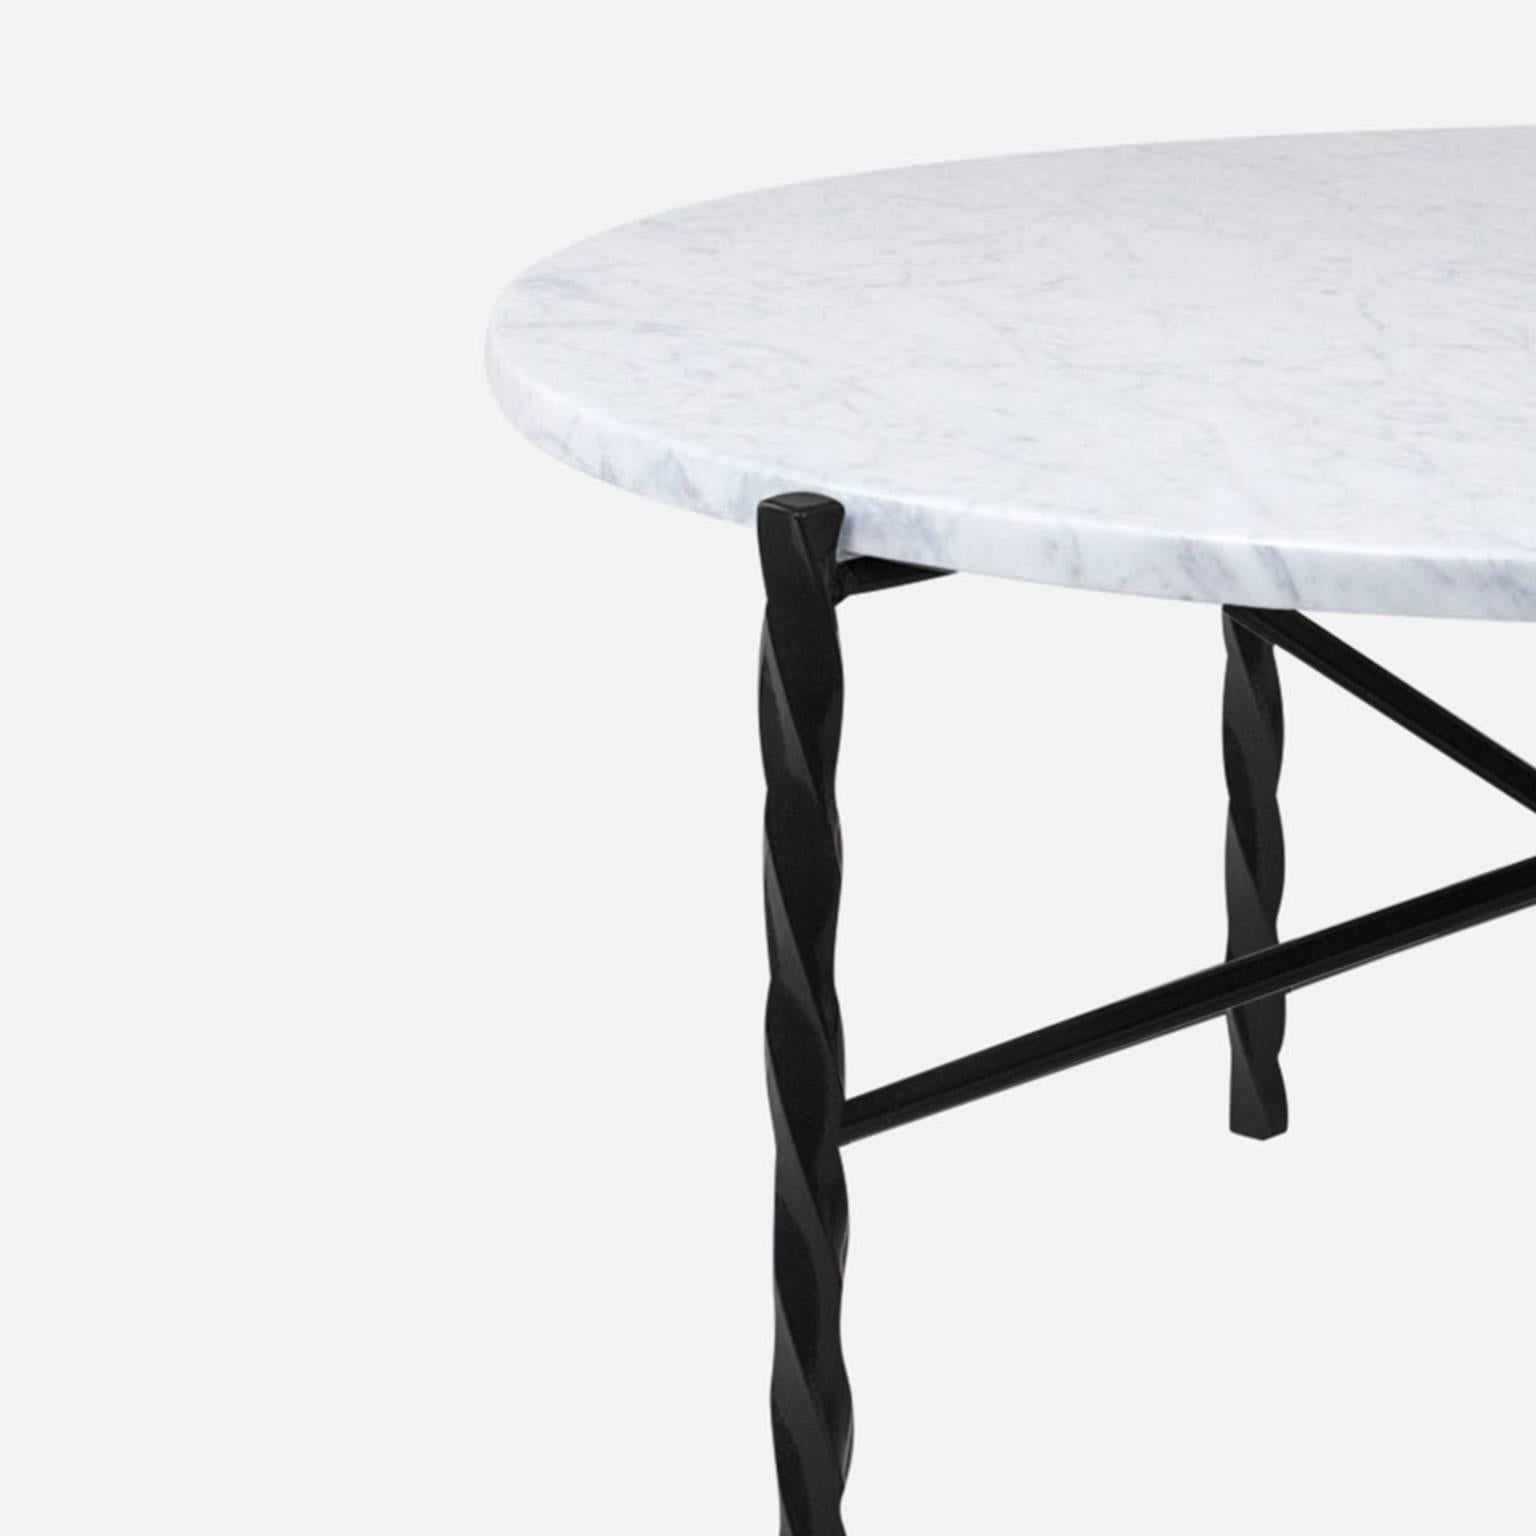 The Von Iron series consists of coffee and side tables with a distinctive twist. Inspired by traditional blacksmith crafts, twisted metal legs combine with marble or wood to create an instantly iconic line of tables. Classy, modern, and visually